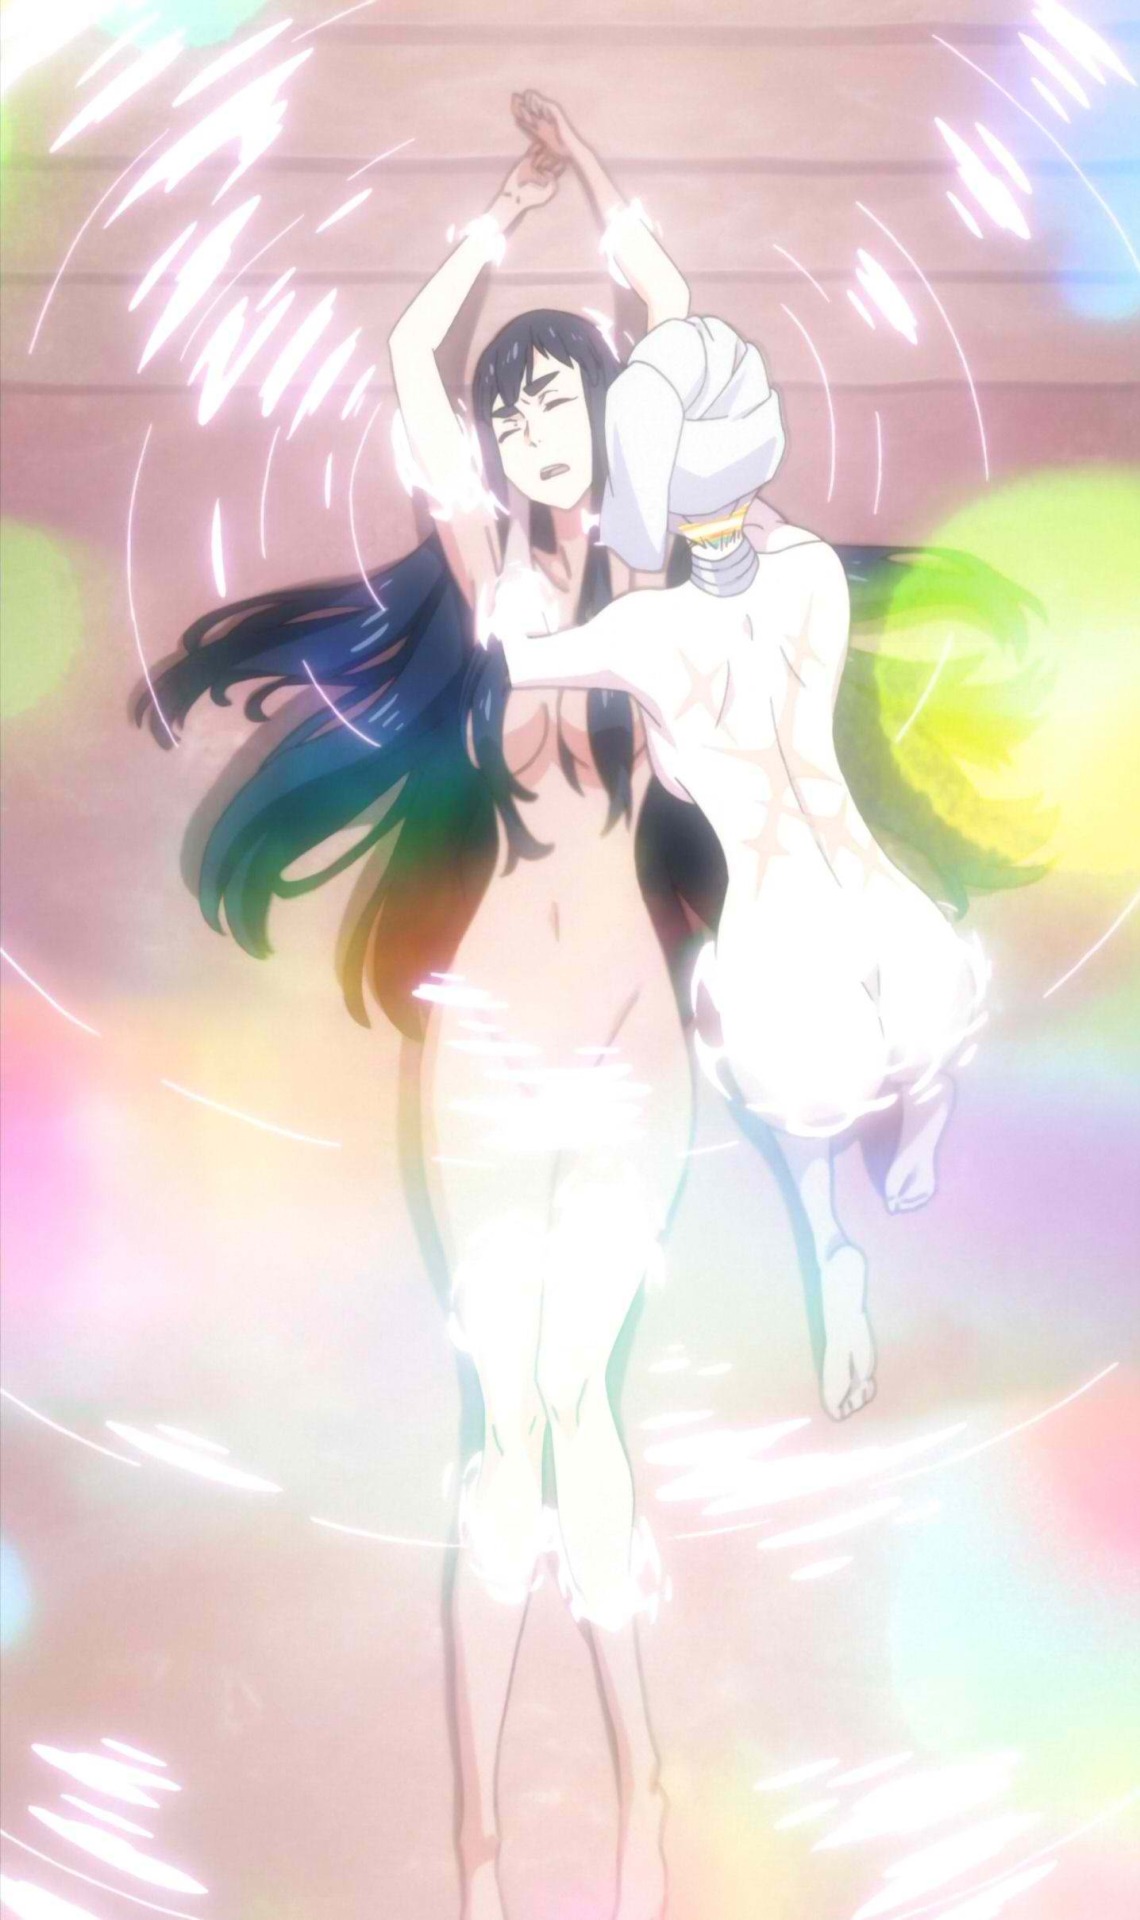 So is Kill La Kill still parodying and/or satirizing fanservice in anime? Because